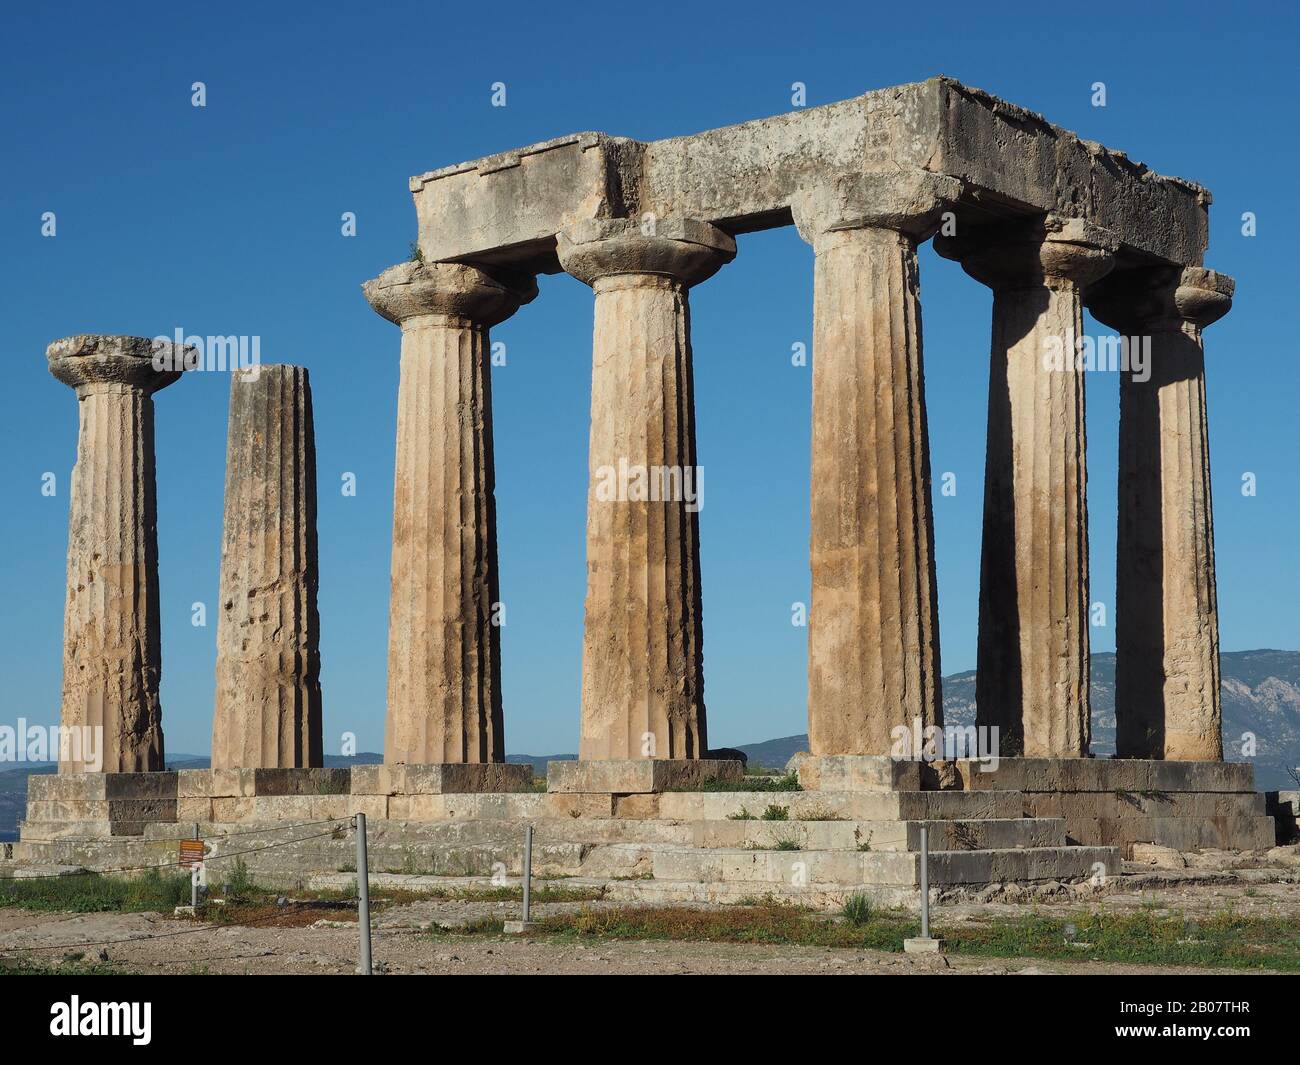 Doric columns of the Archaic Temple to Apollo in Corinth, Peloponnese, Greece against a blue sky Stock Photo